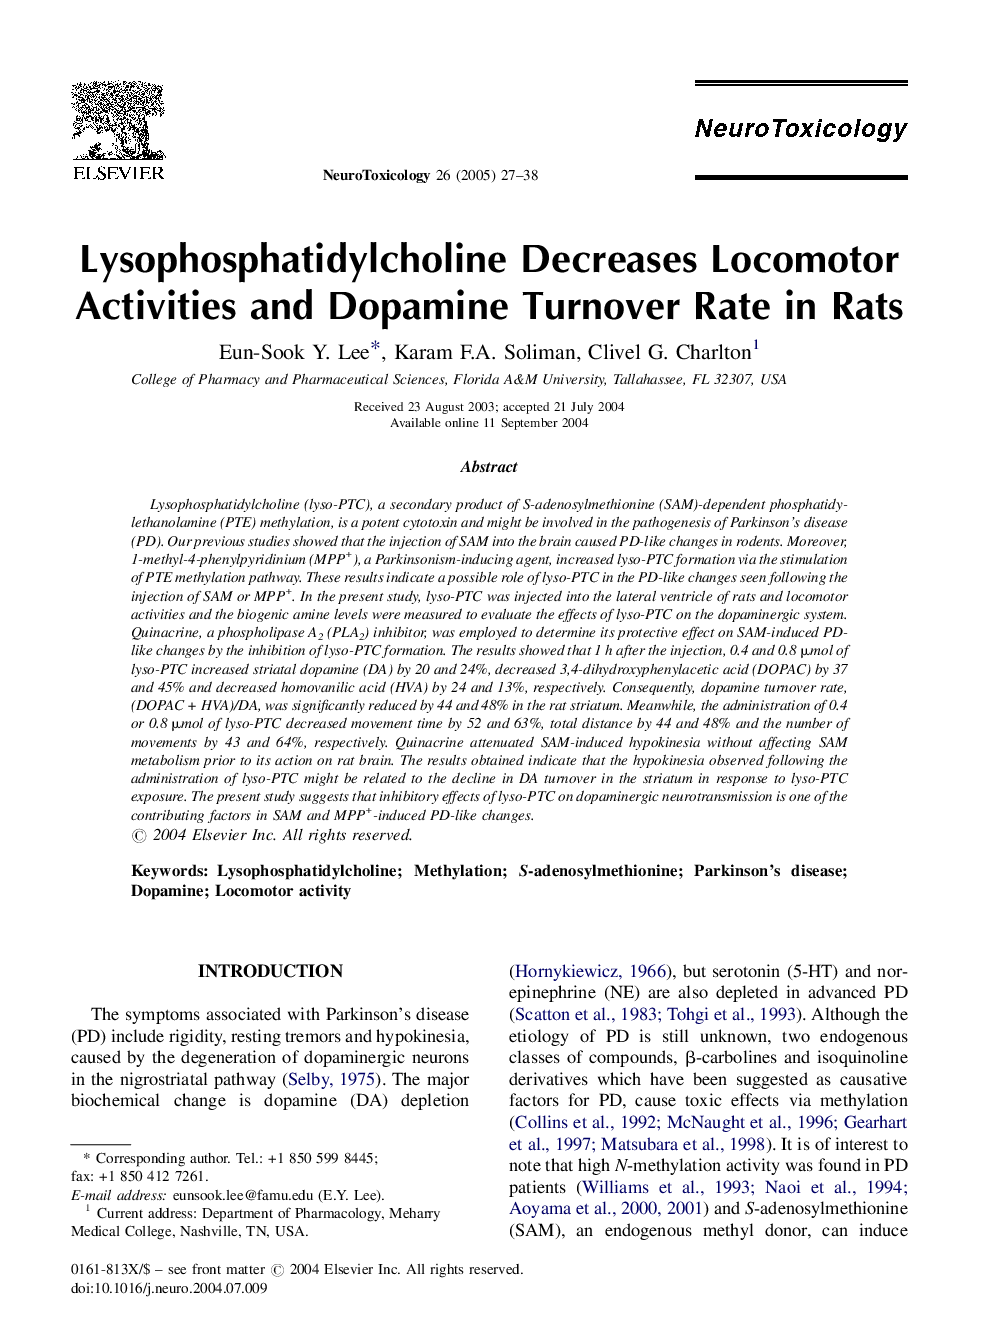 Lysophosphatidylcholine Decreases Locomotor Activities and Dopamine Turnover Rate in Rats